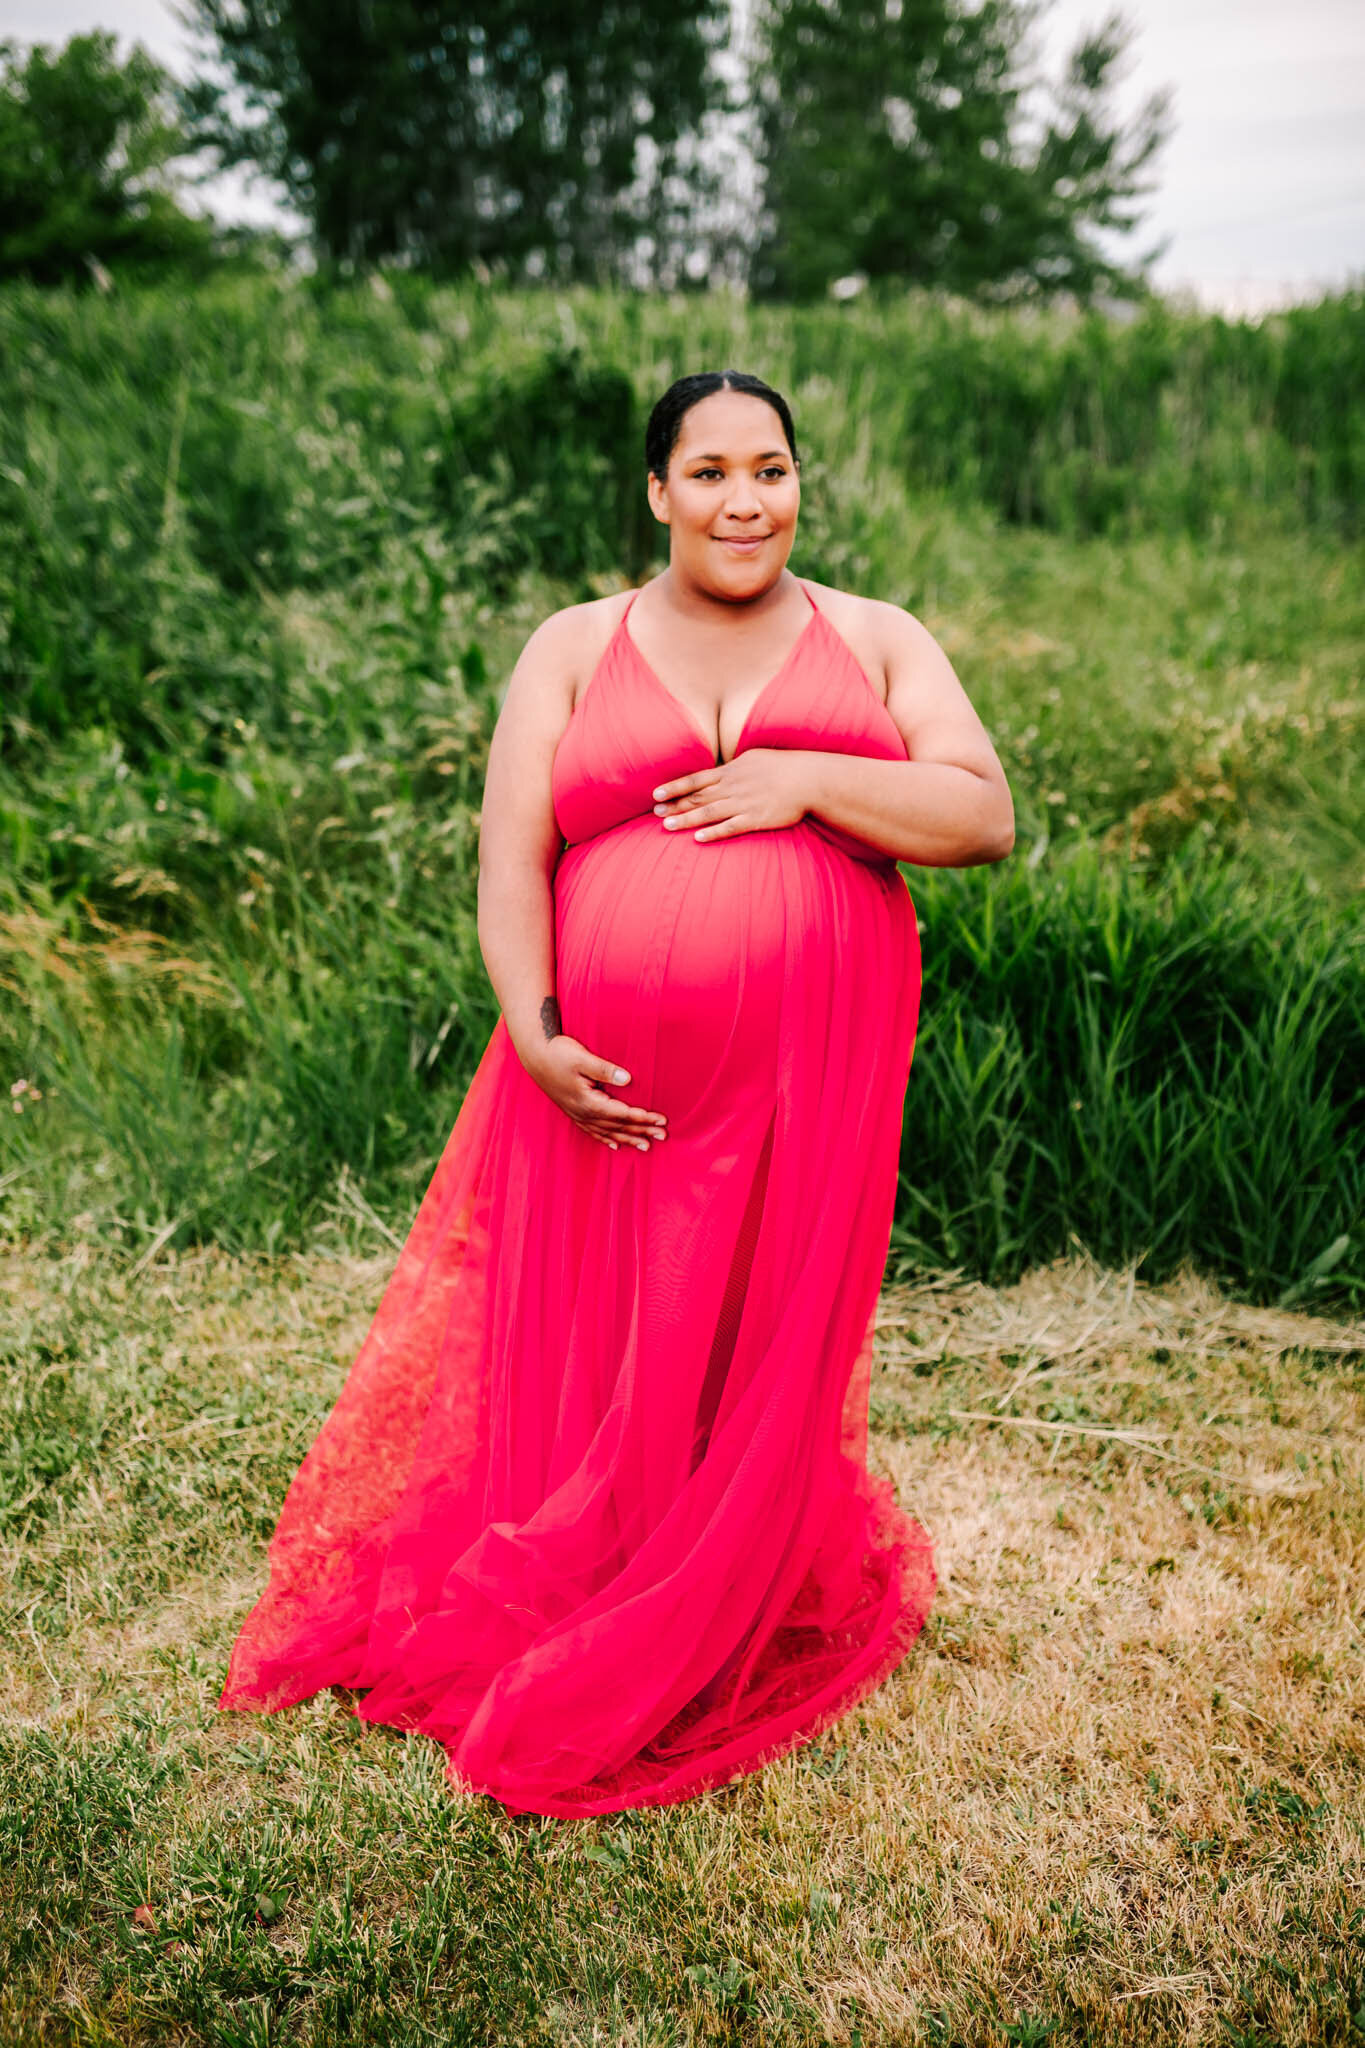 woman in a pink dress stands holding her pregnant belly during her maternity session.